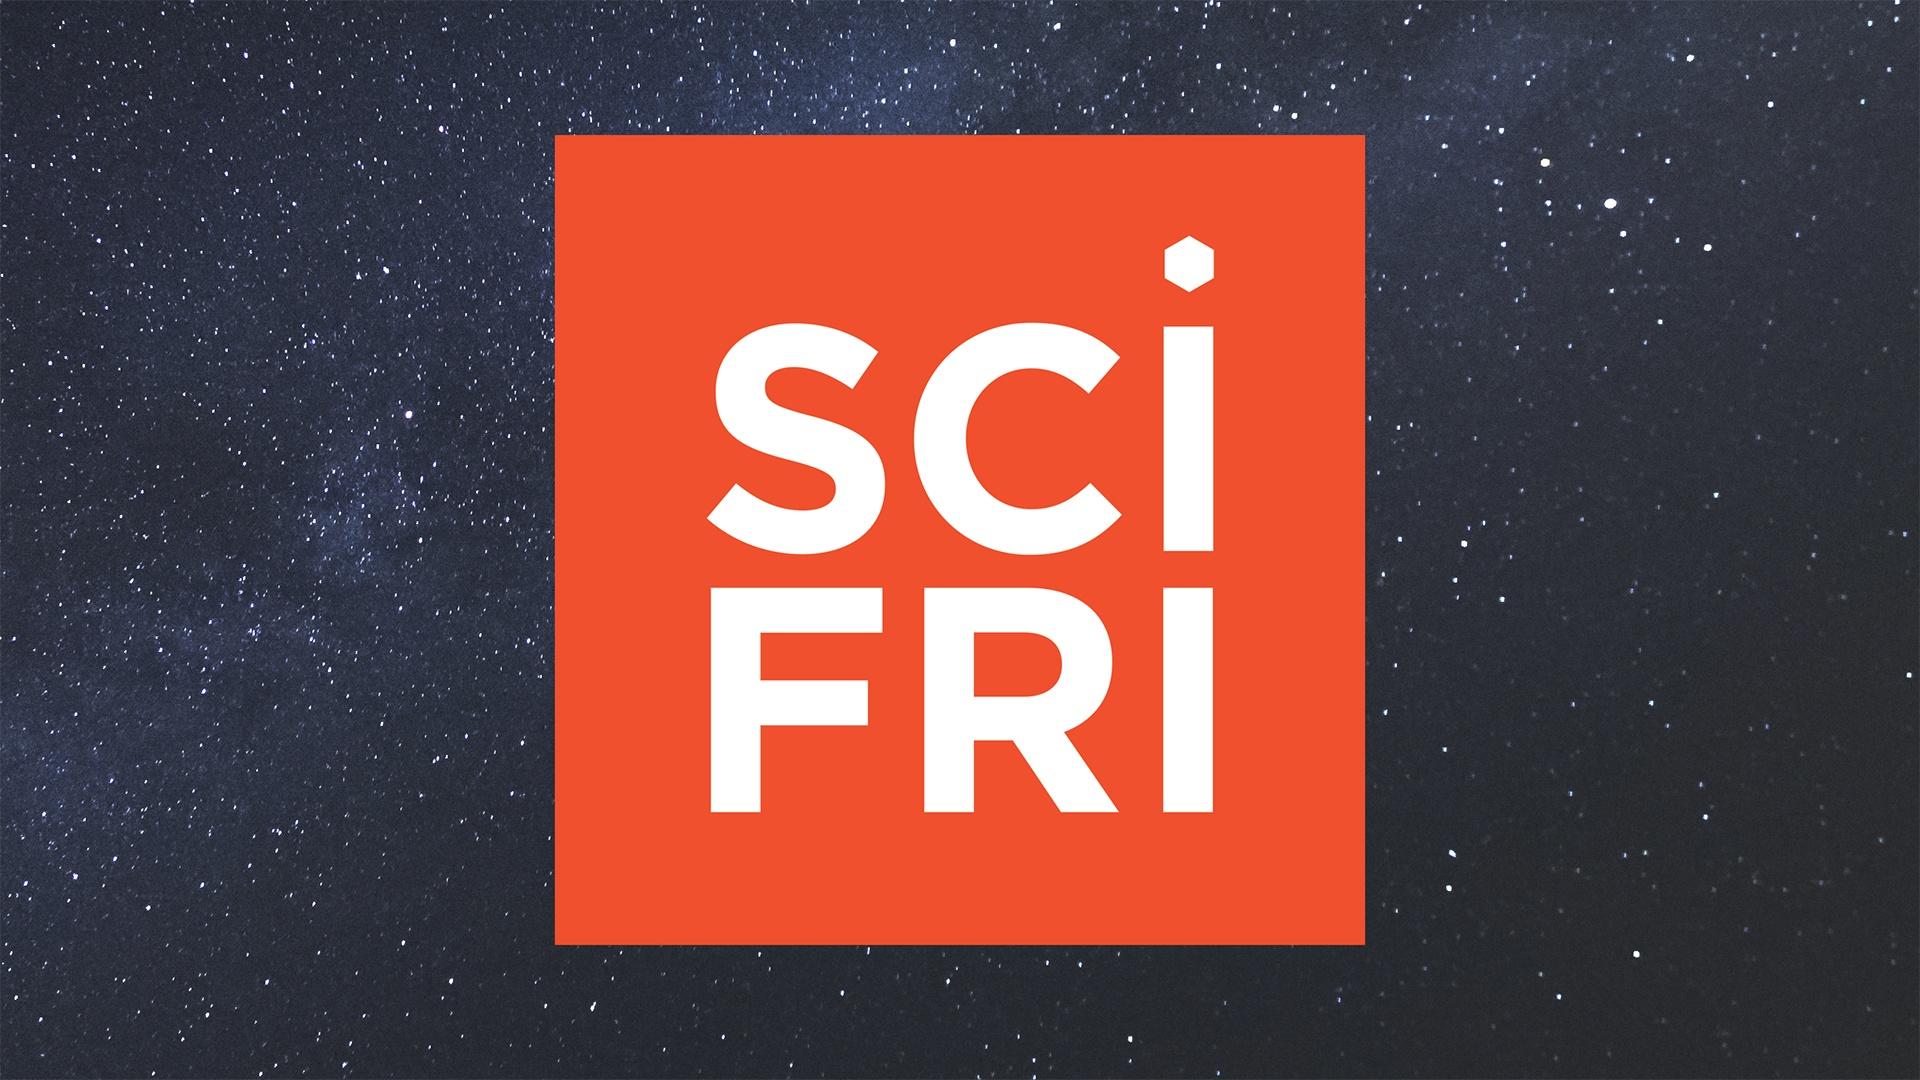 Learn More about Science Friday